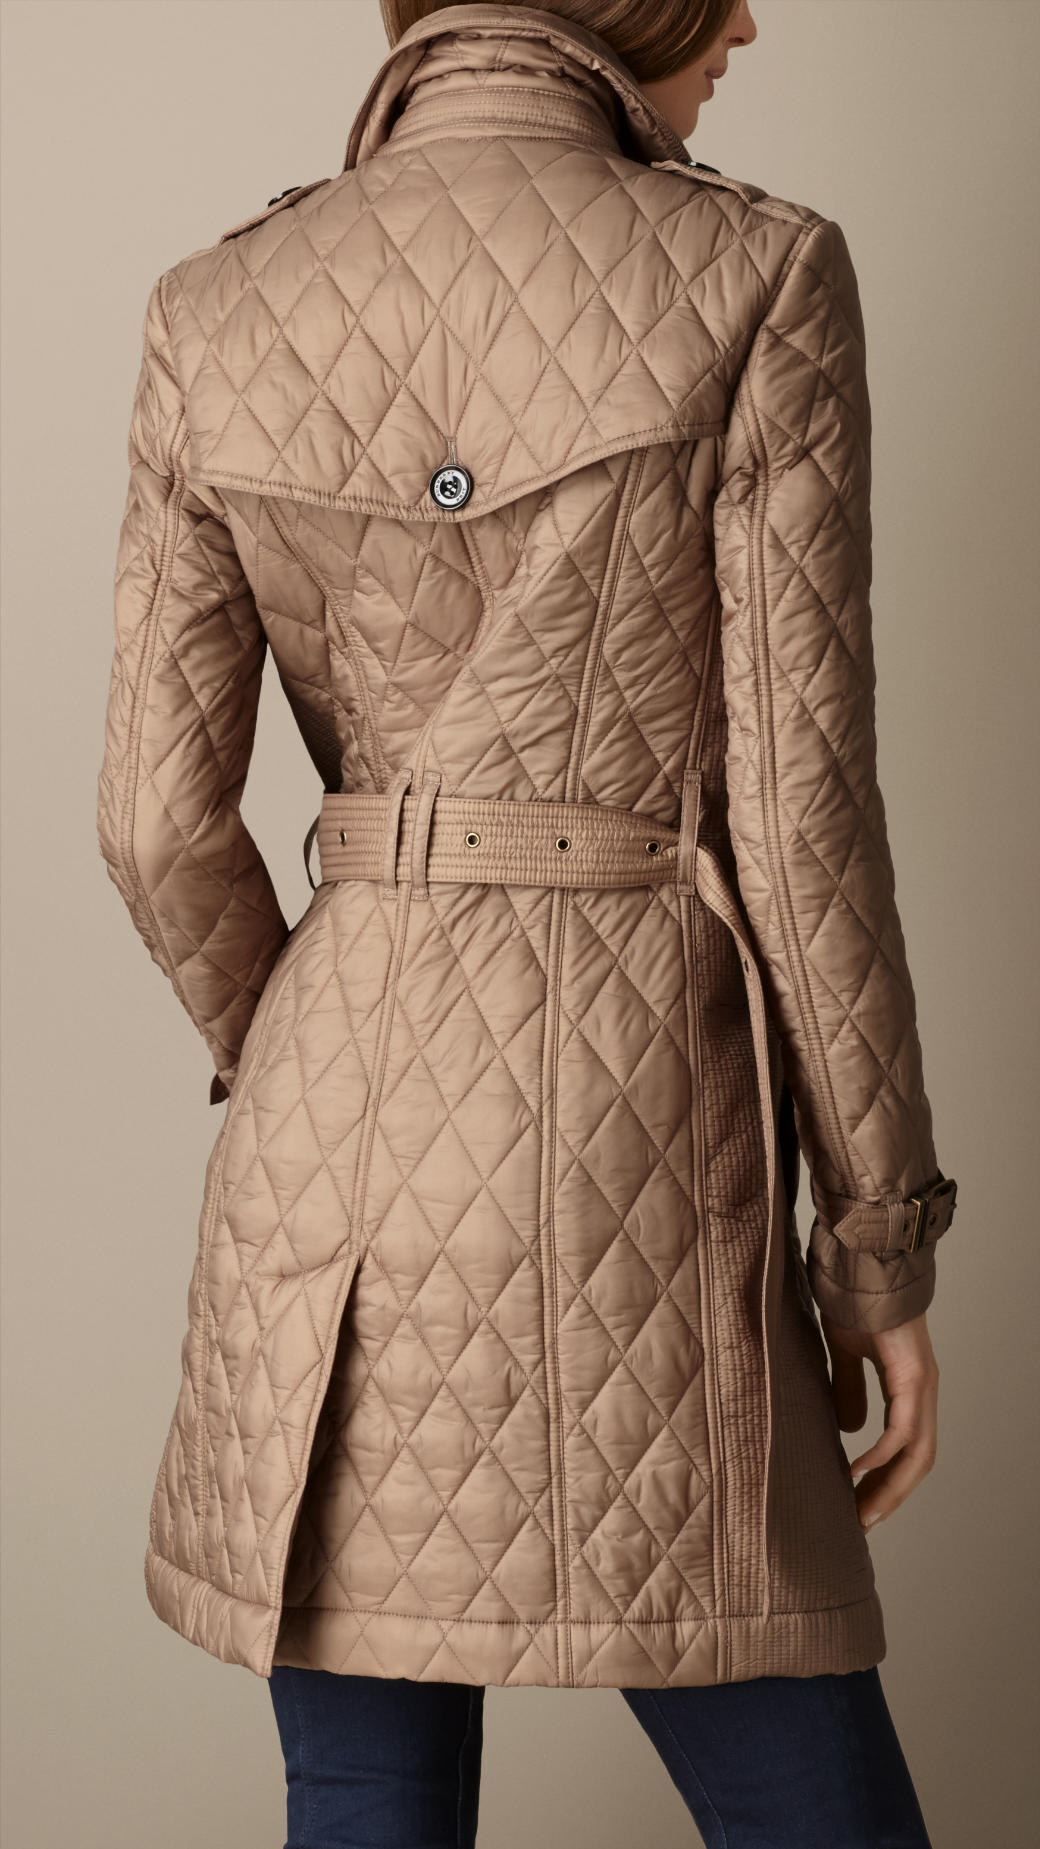 Lyst - Burberry Midlength Diamond Quilt Trench Coat in Brown